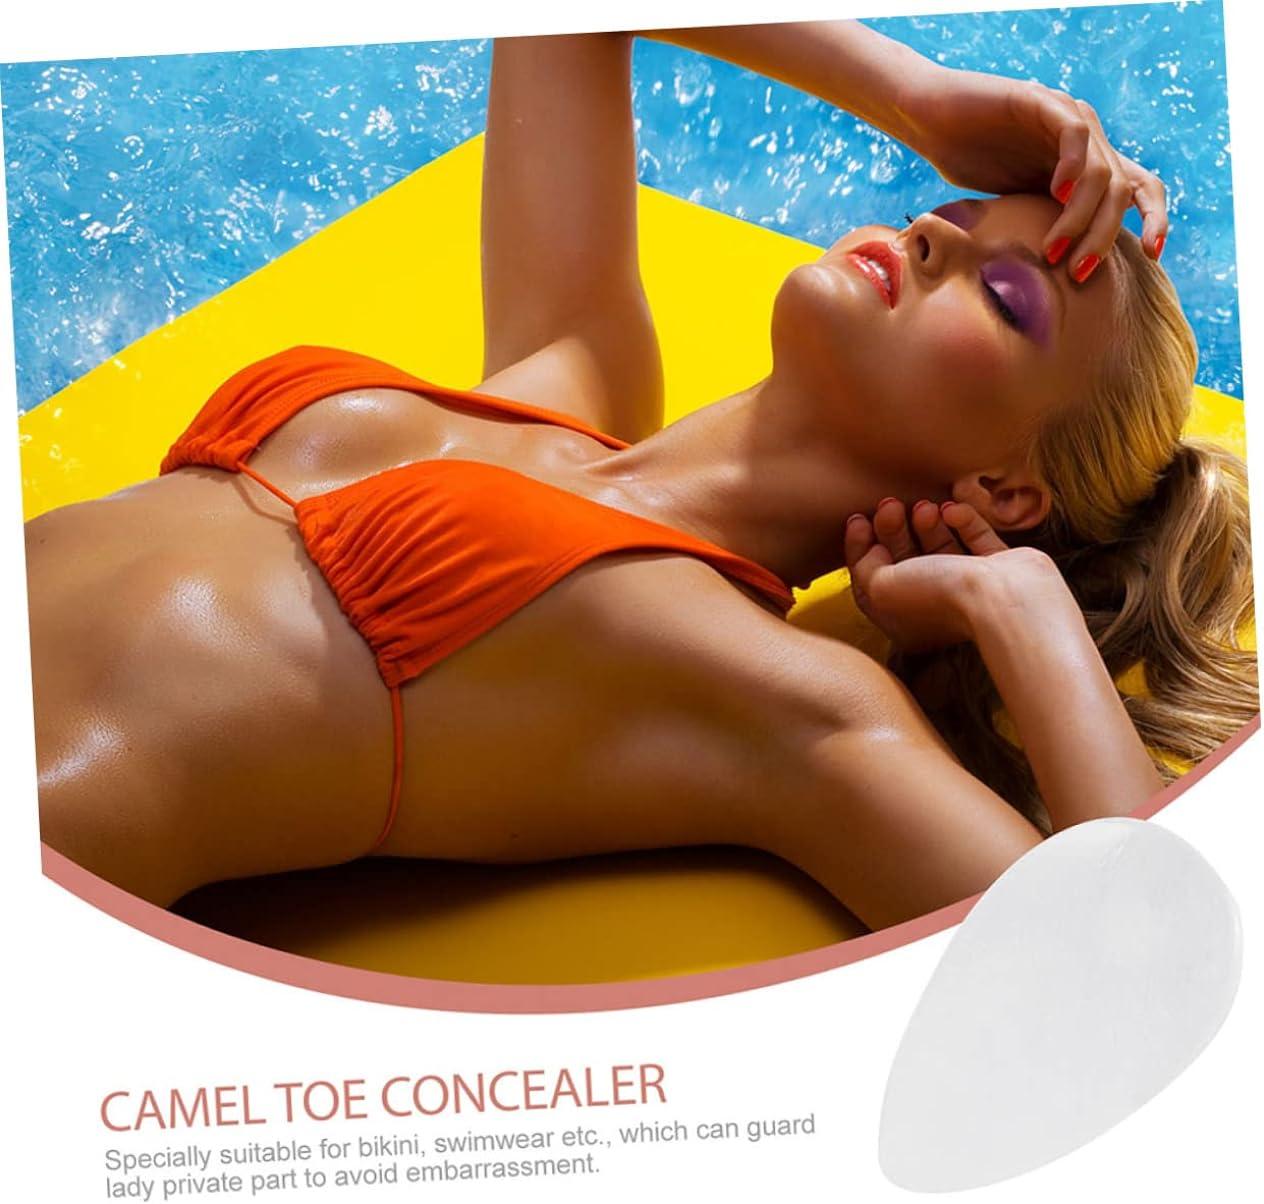 DOITOOL 4 Pcs Private Parts Protector Women's Swimsuit Water Proof Stickers  Cover up Makeup Concealer Camel Toe As Shown1x4pcs 9X5X0.15CMx4pcs